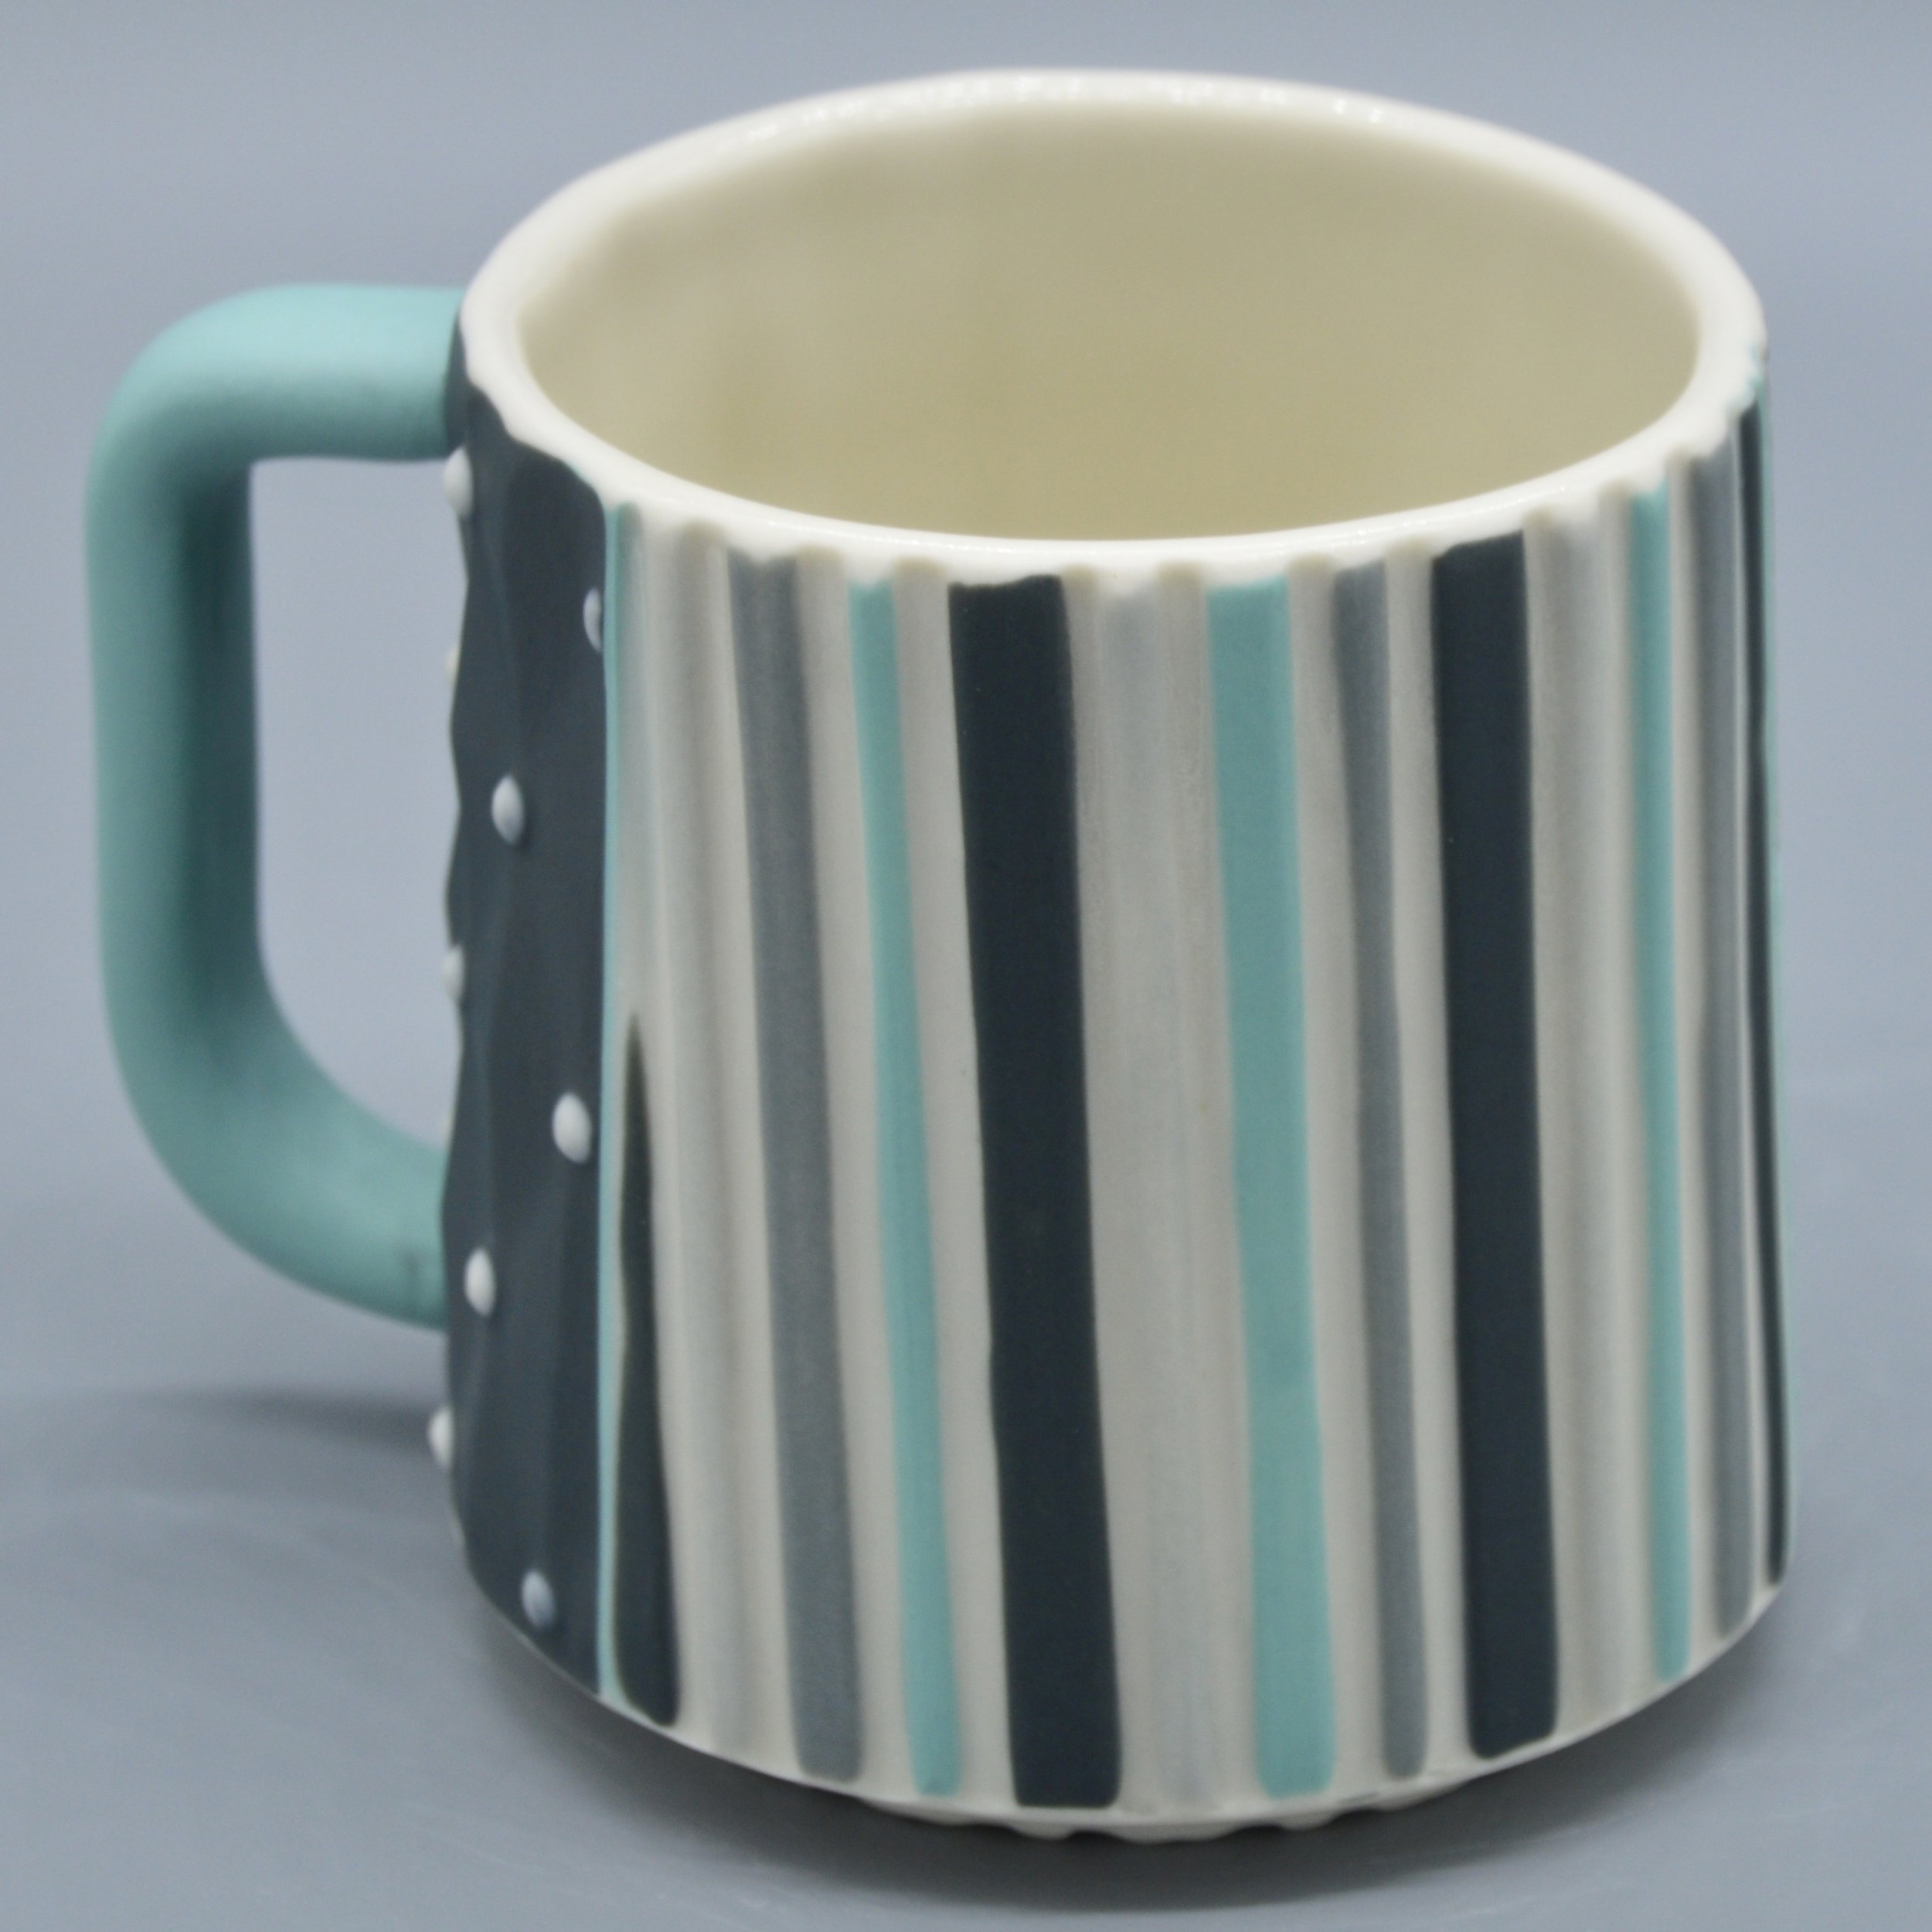 Pinstripe in Turquoise + Shades of Grey